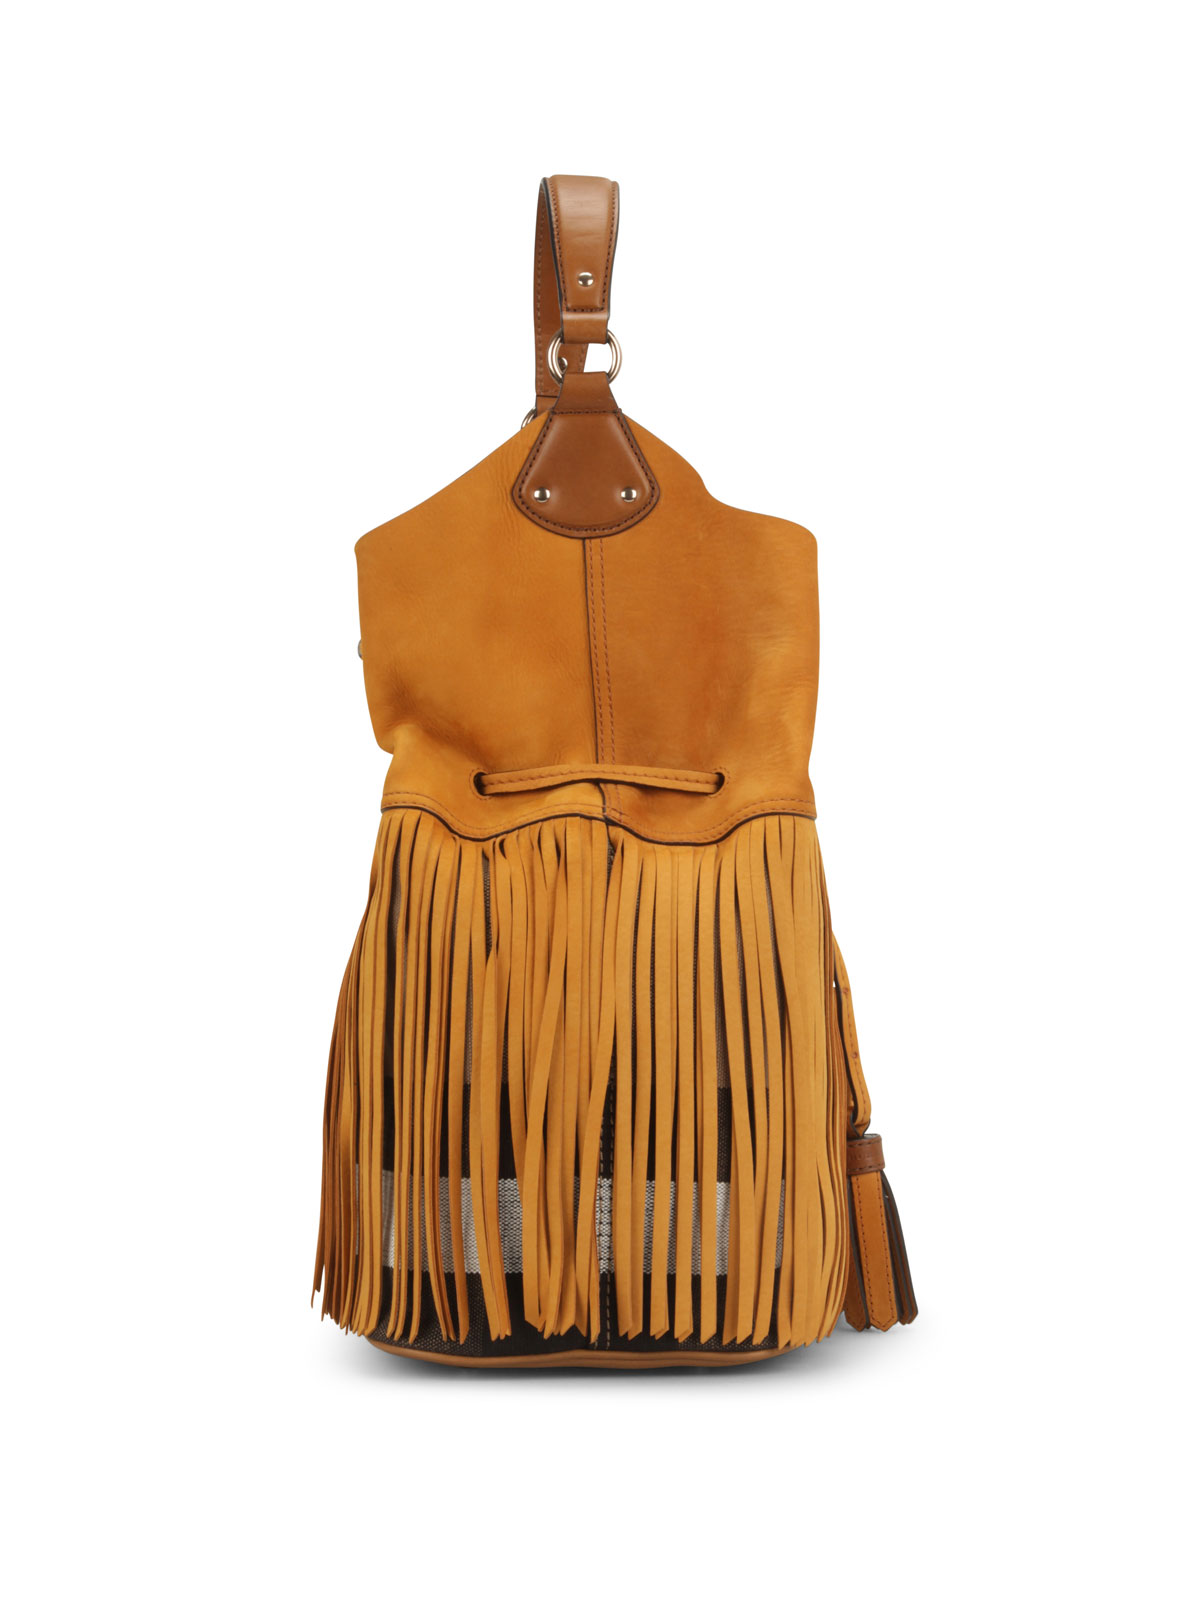 Burberry Leather & Check Canvas Fringe Bucket Bag